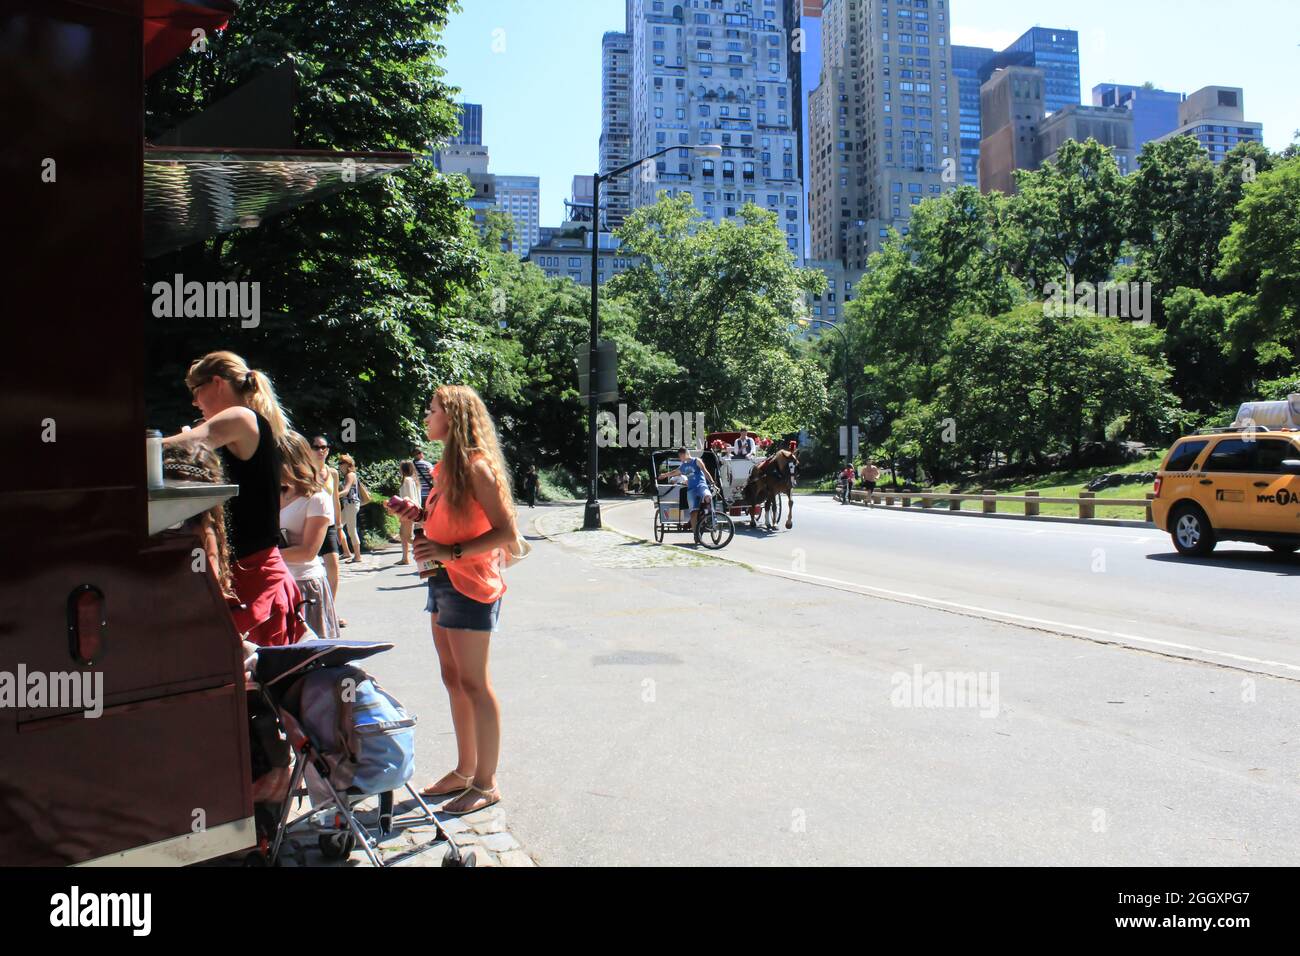 People standing in line outside of Central Park waiting to buy snacks and water. A horse carriage is passing by with people riding it. Stock Photo